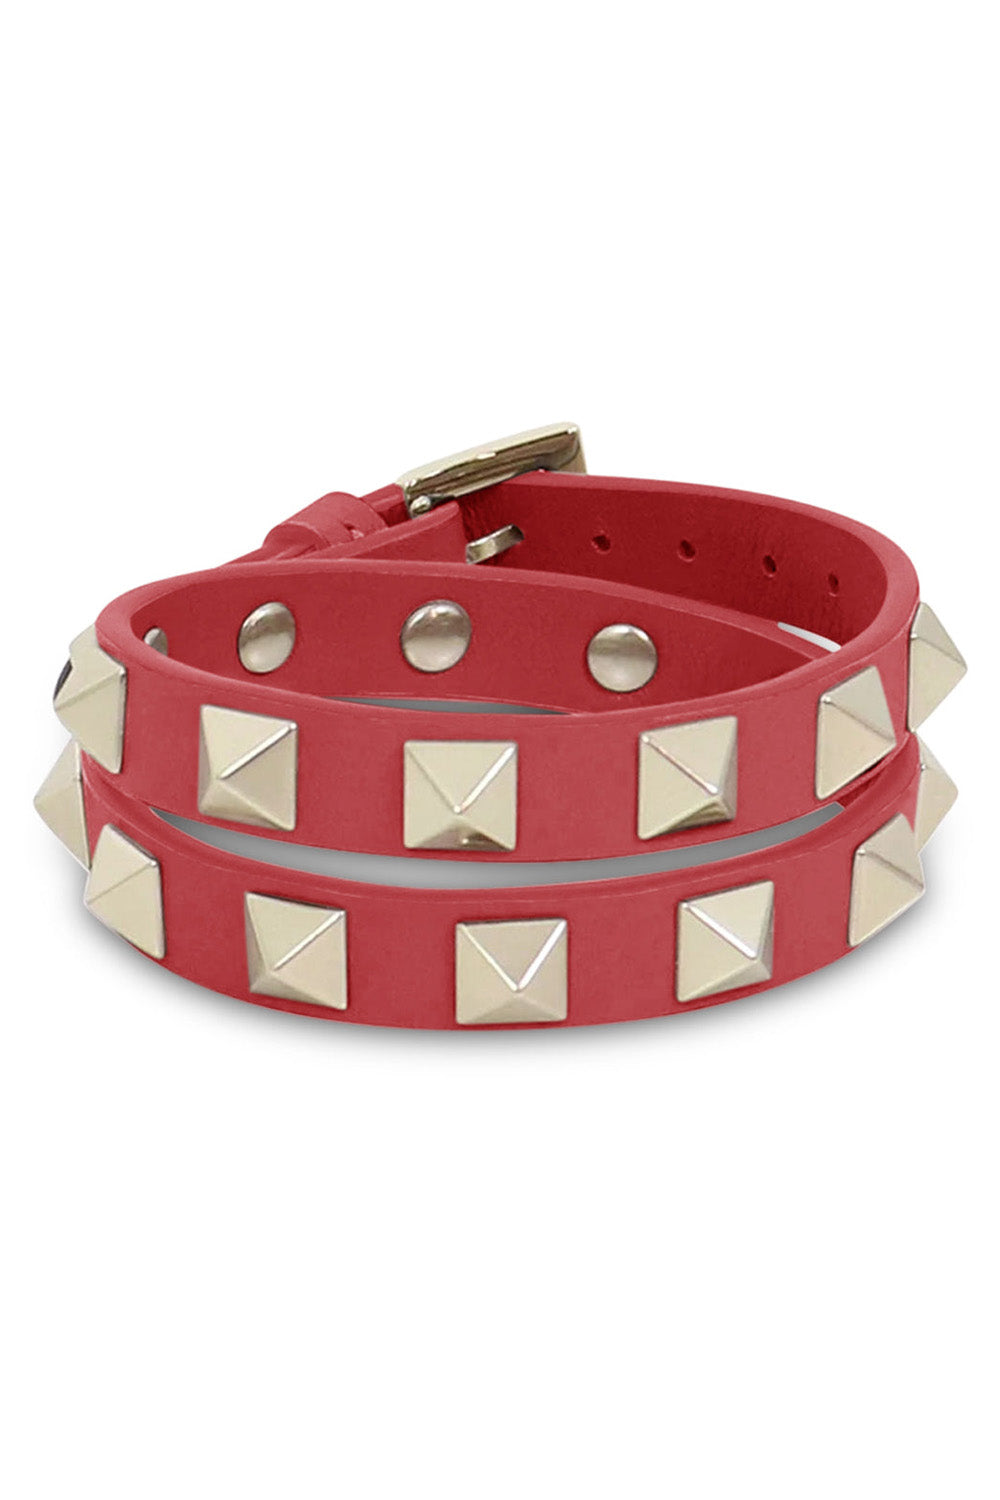 VALENTINO BAGS PINK ROCKSTUD WRAP LEATHER CUFF ROCK PINK